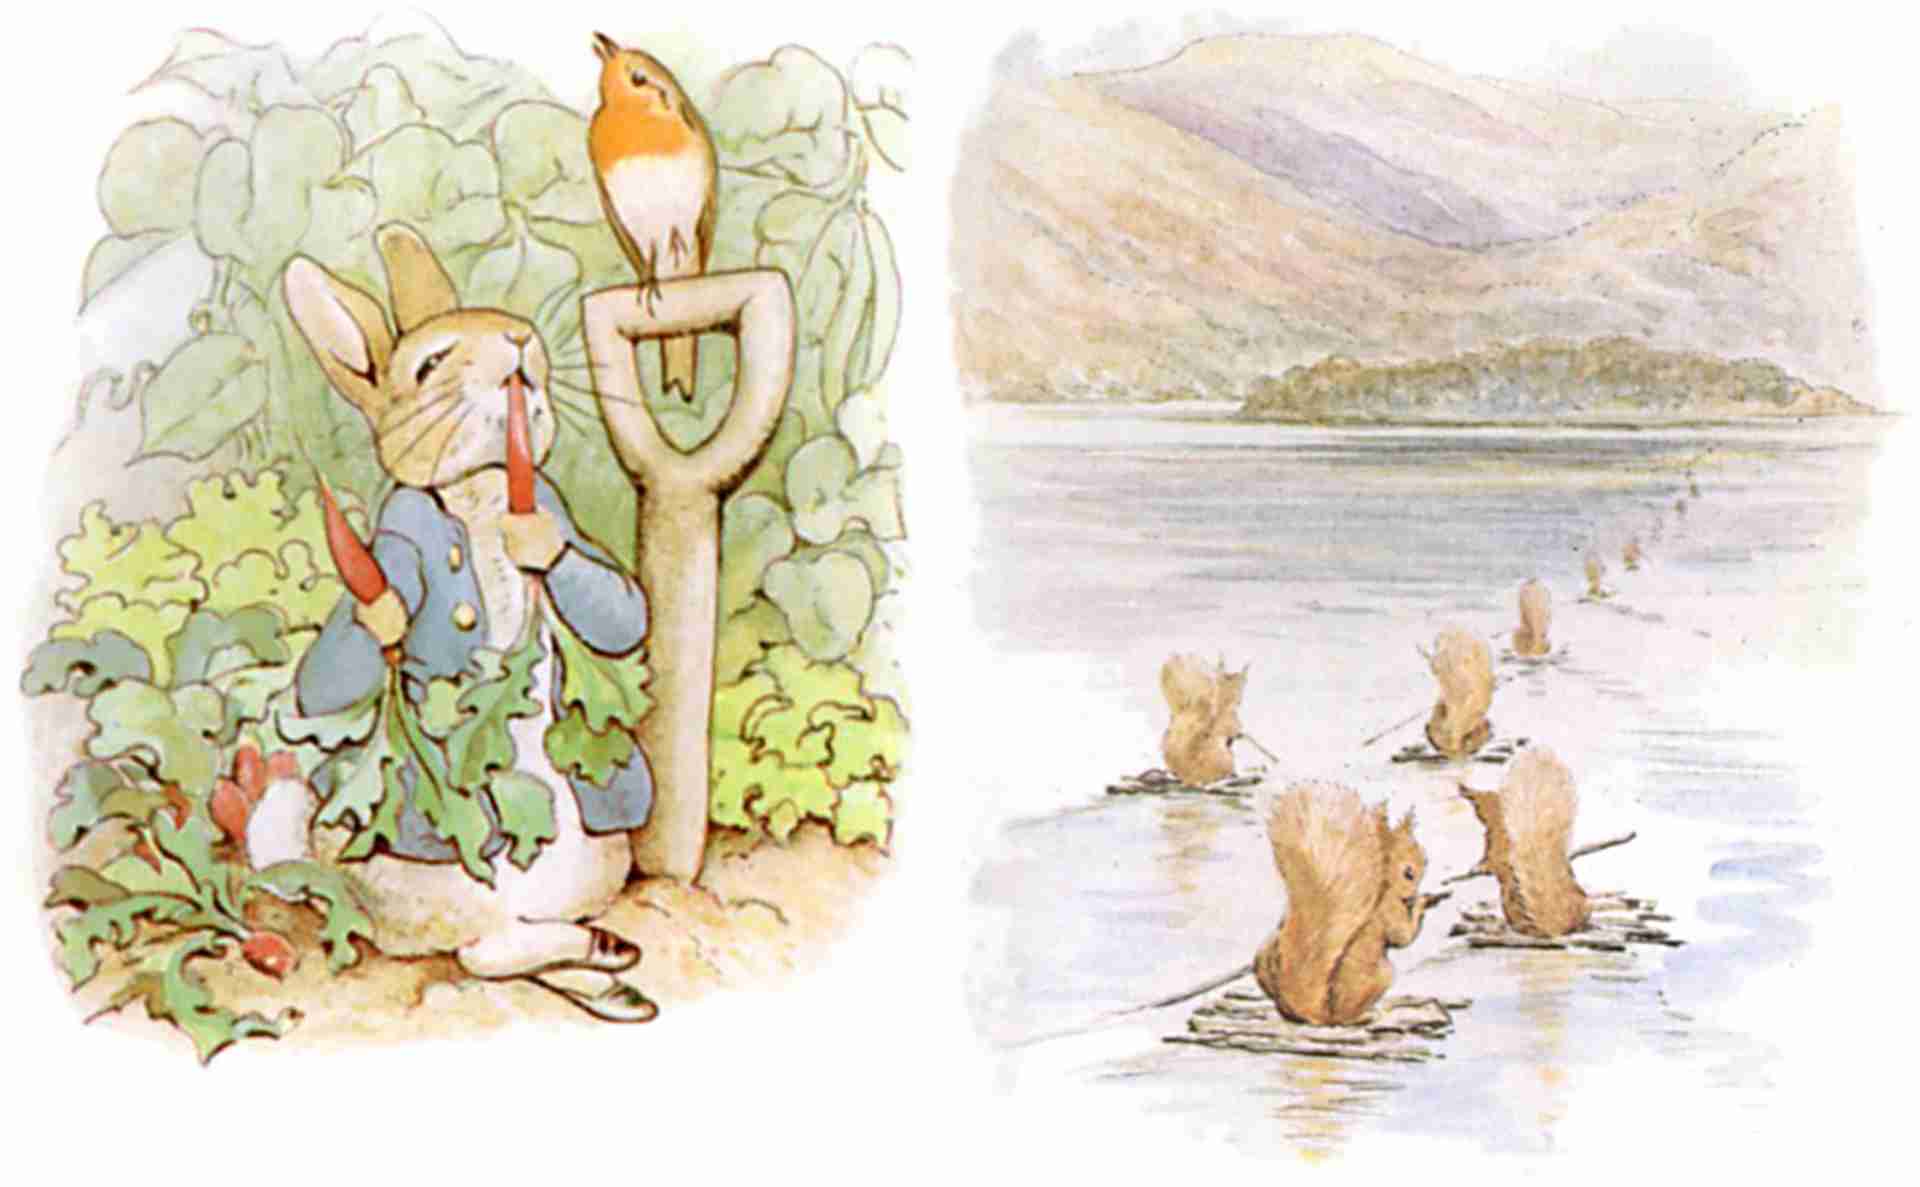 Private Beatrix Potter Full Day All Inclusive Tour Expert Guide